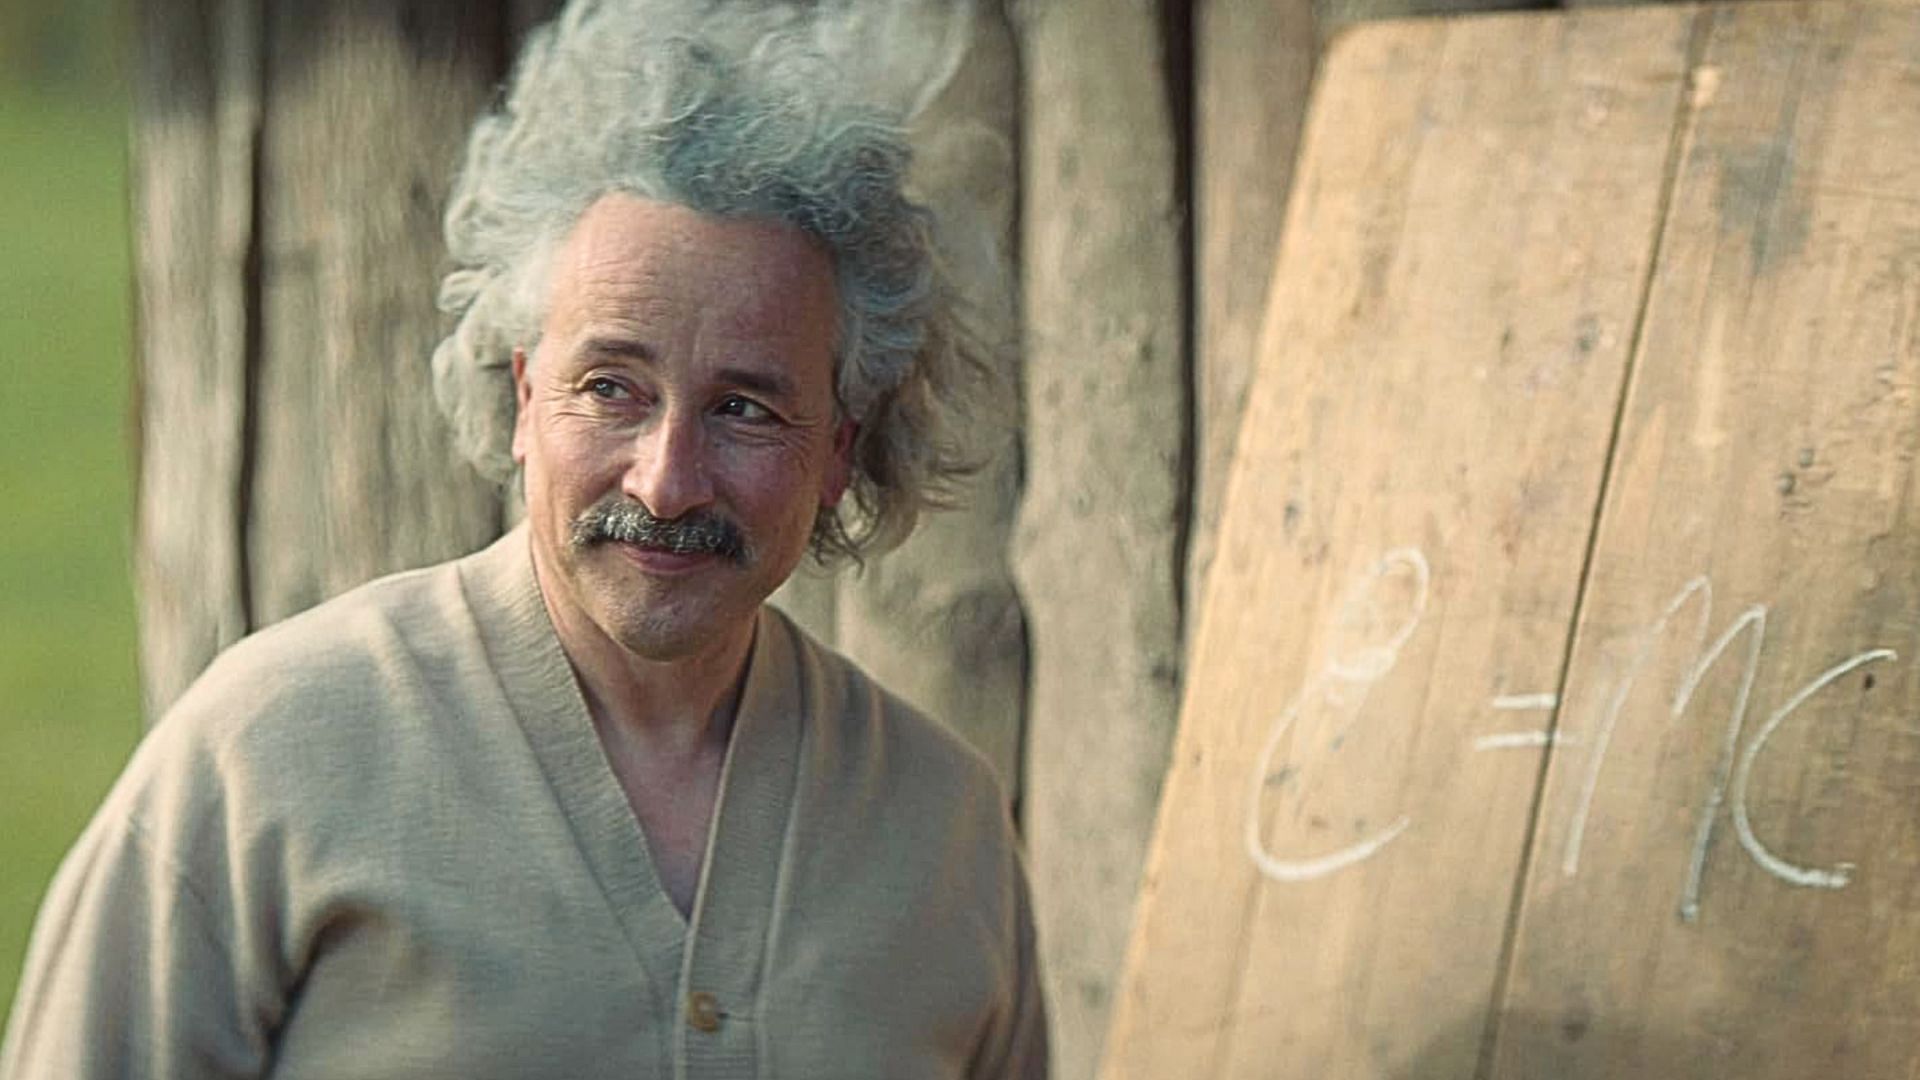 Actor Aidan McArdle in a still from Einstein and the Bomb (Image via Netflix)